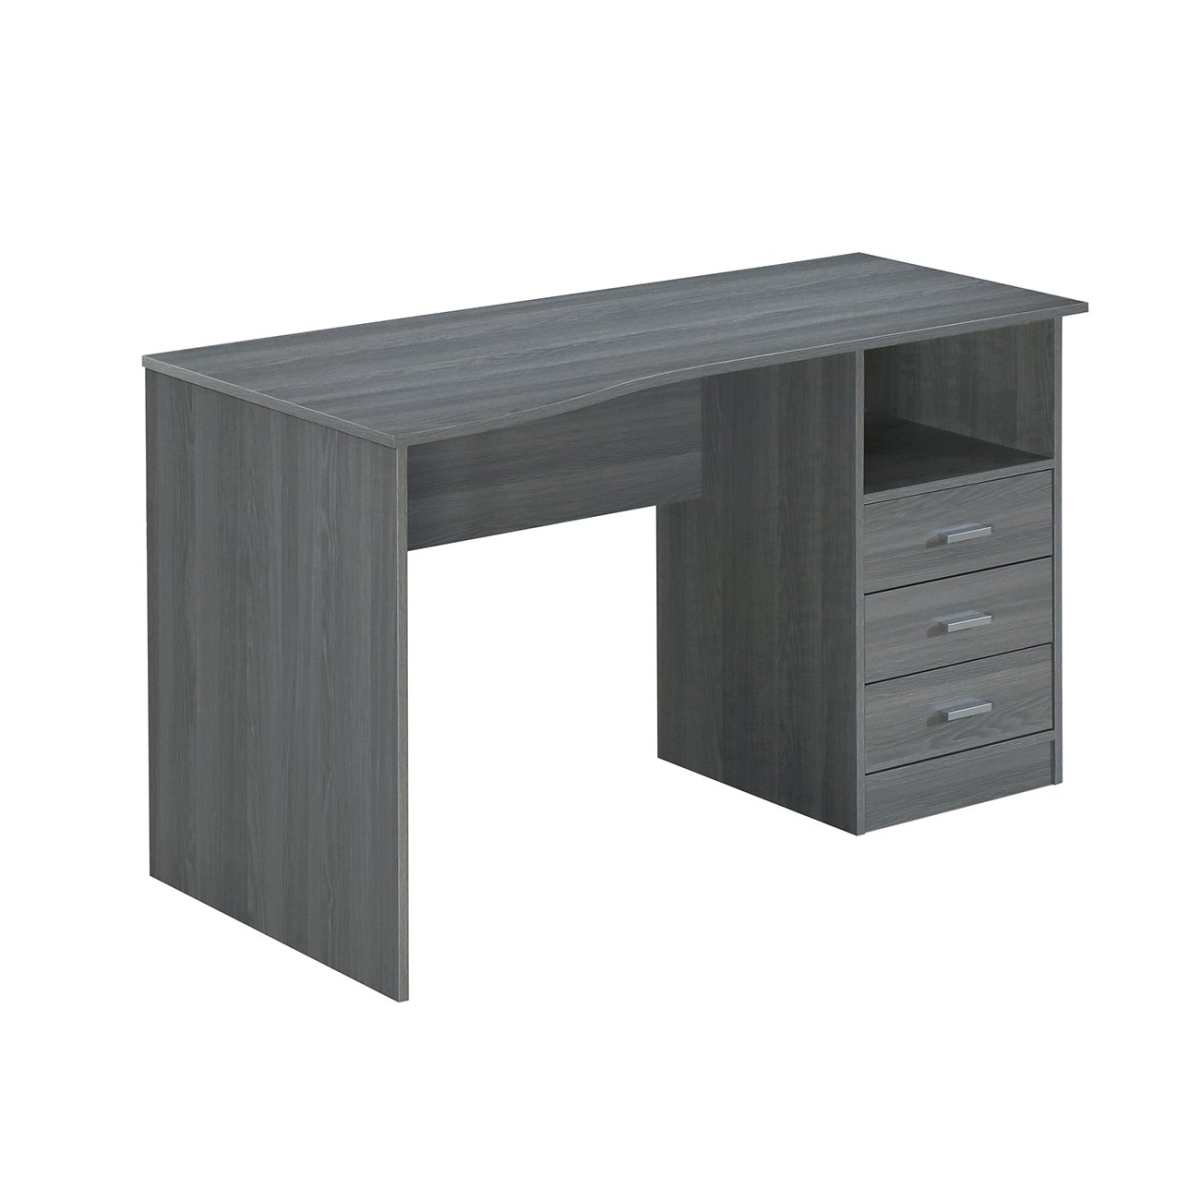 Rta-8404-gry Classic Computer Desk With Multiple Drawers, Grey